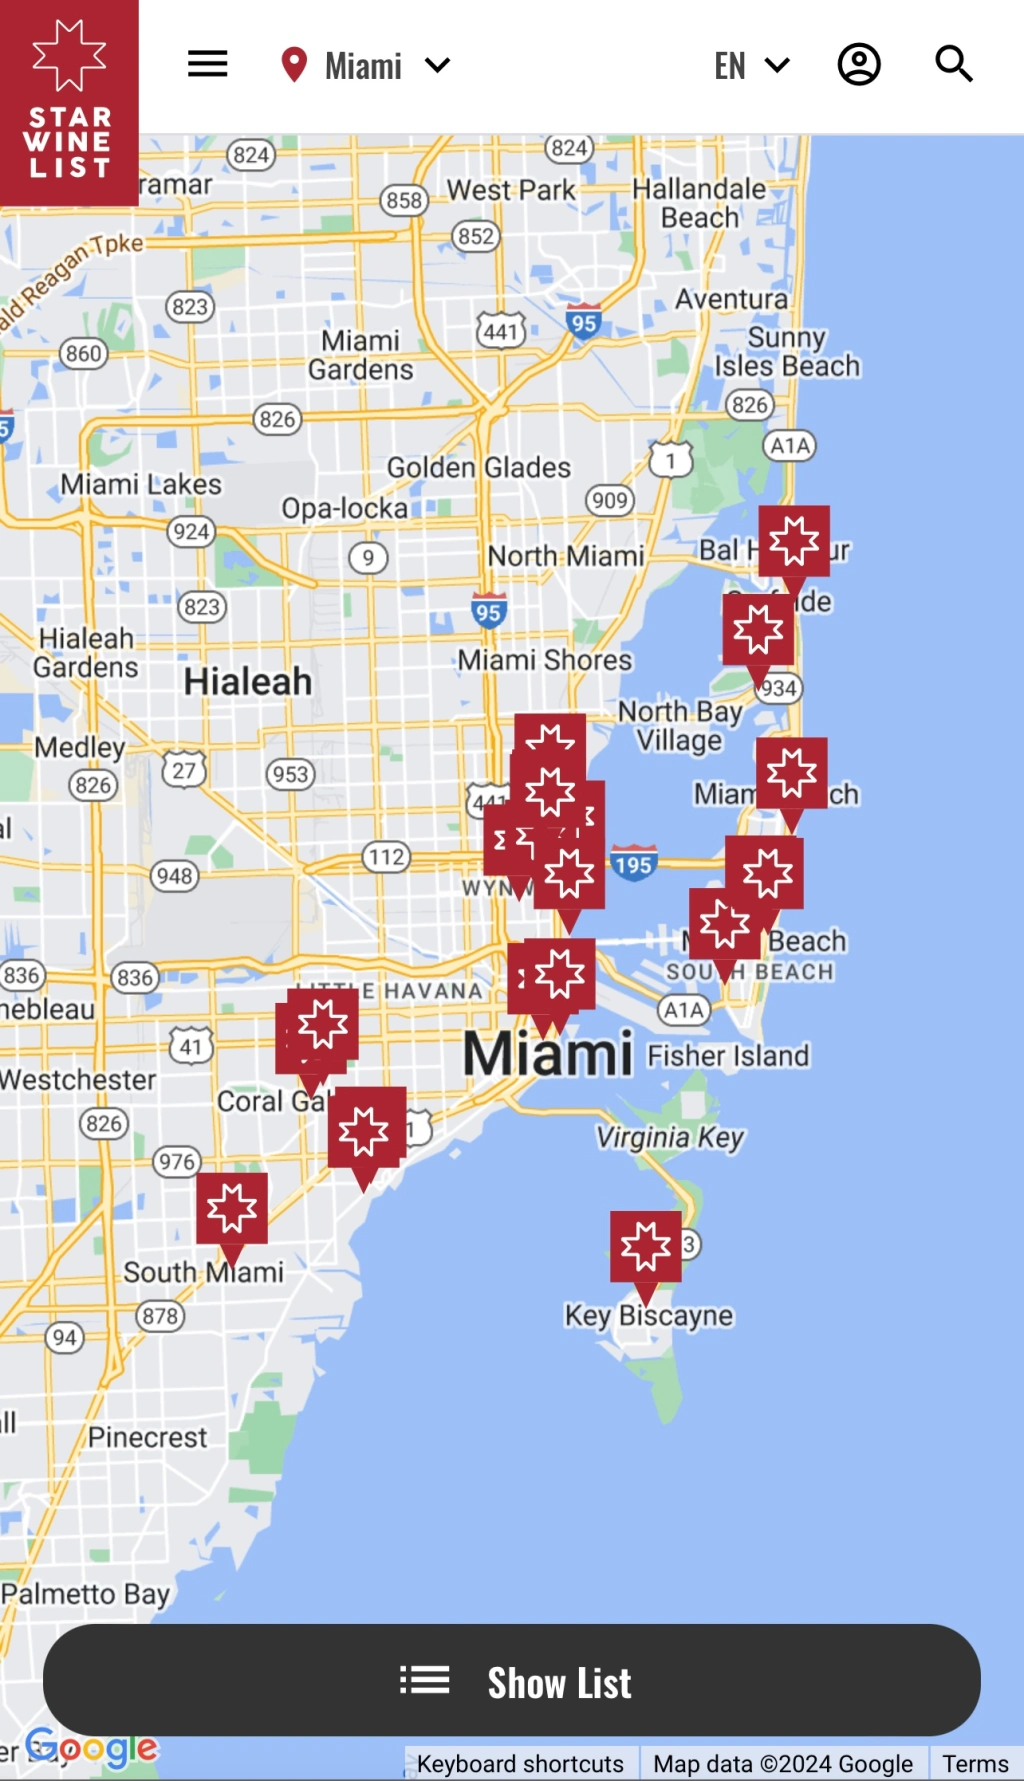 Star Wine List Launches in Miami in Biscayne Times